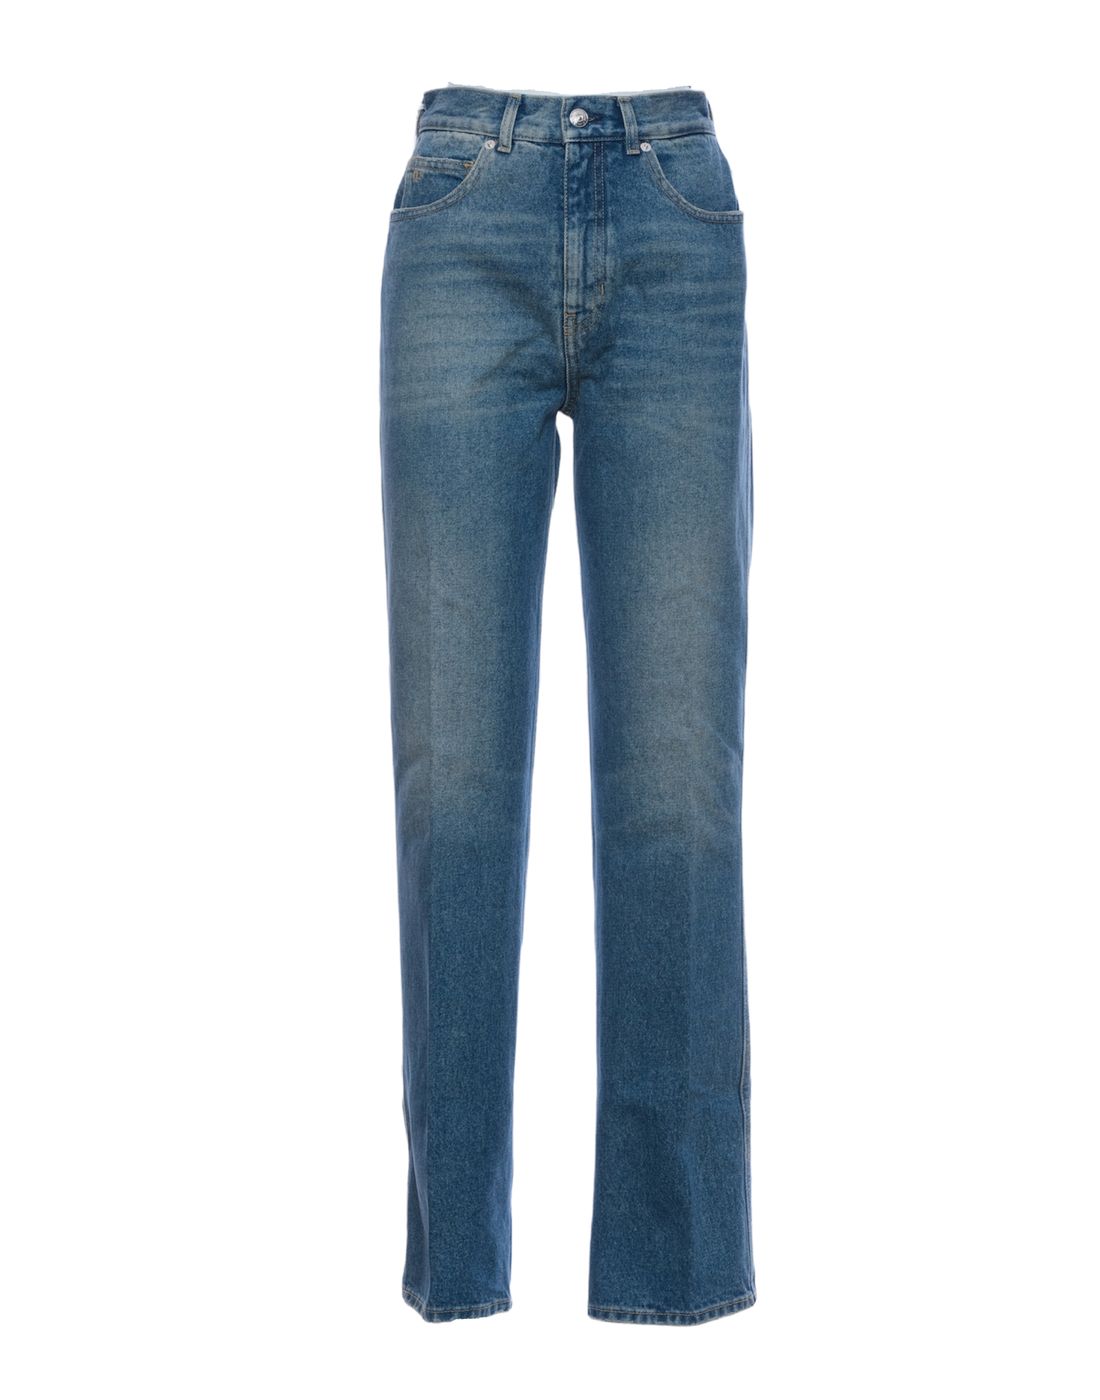 Jeans para mujer Ale01 Alessandra GG342 NINE IN THE MORNING